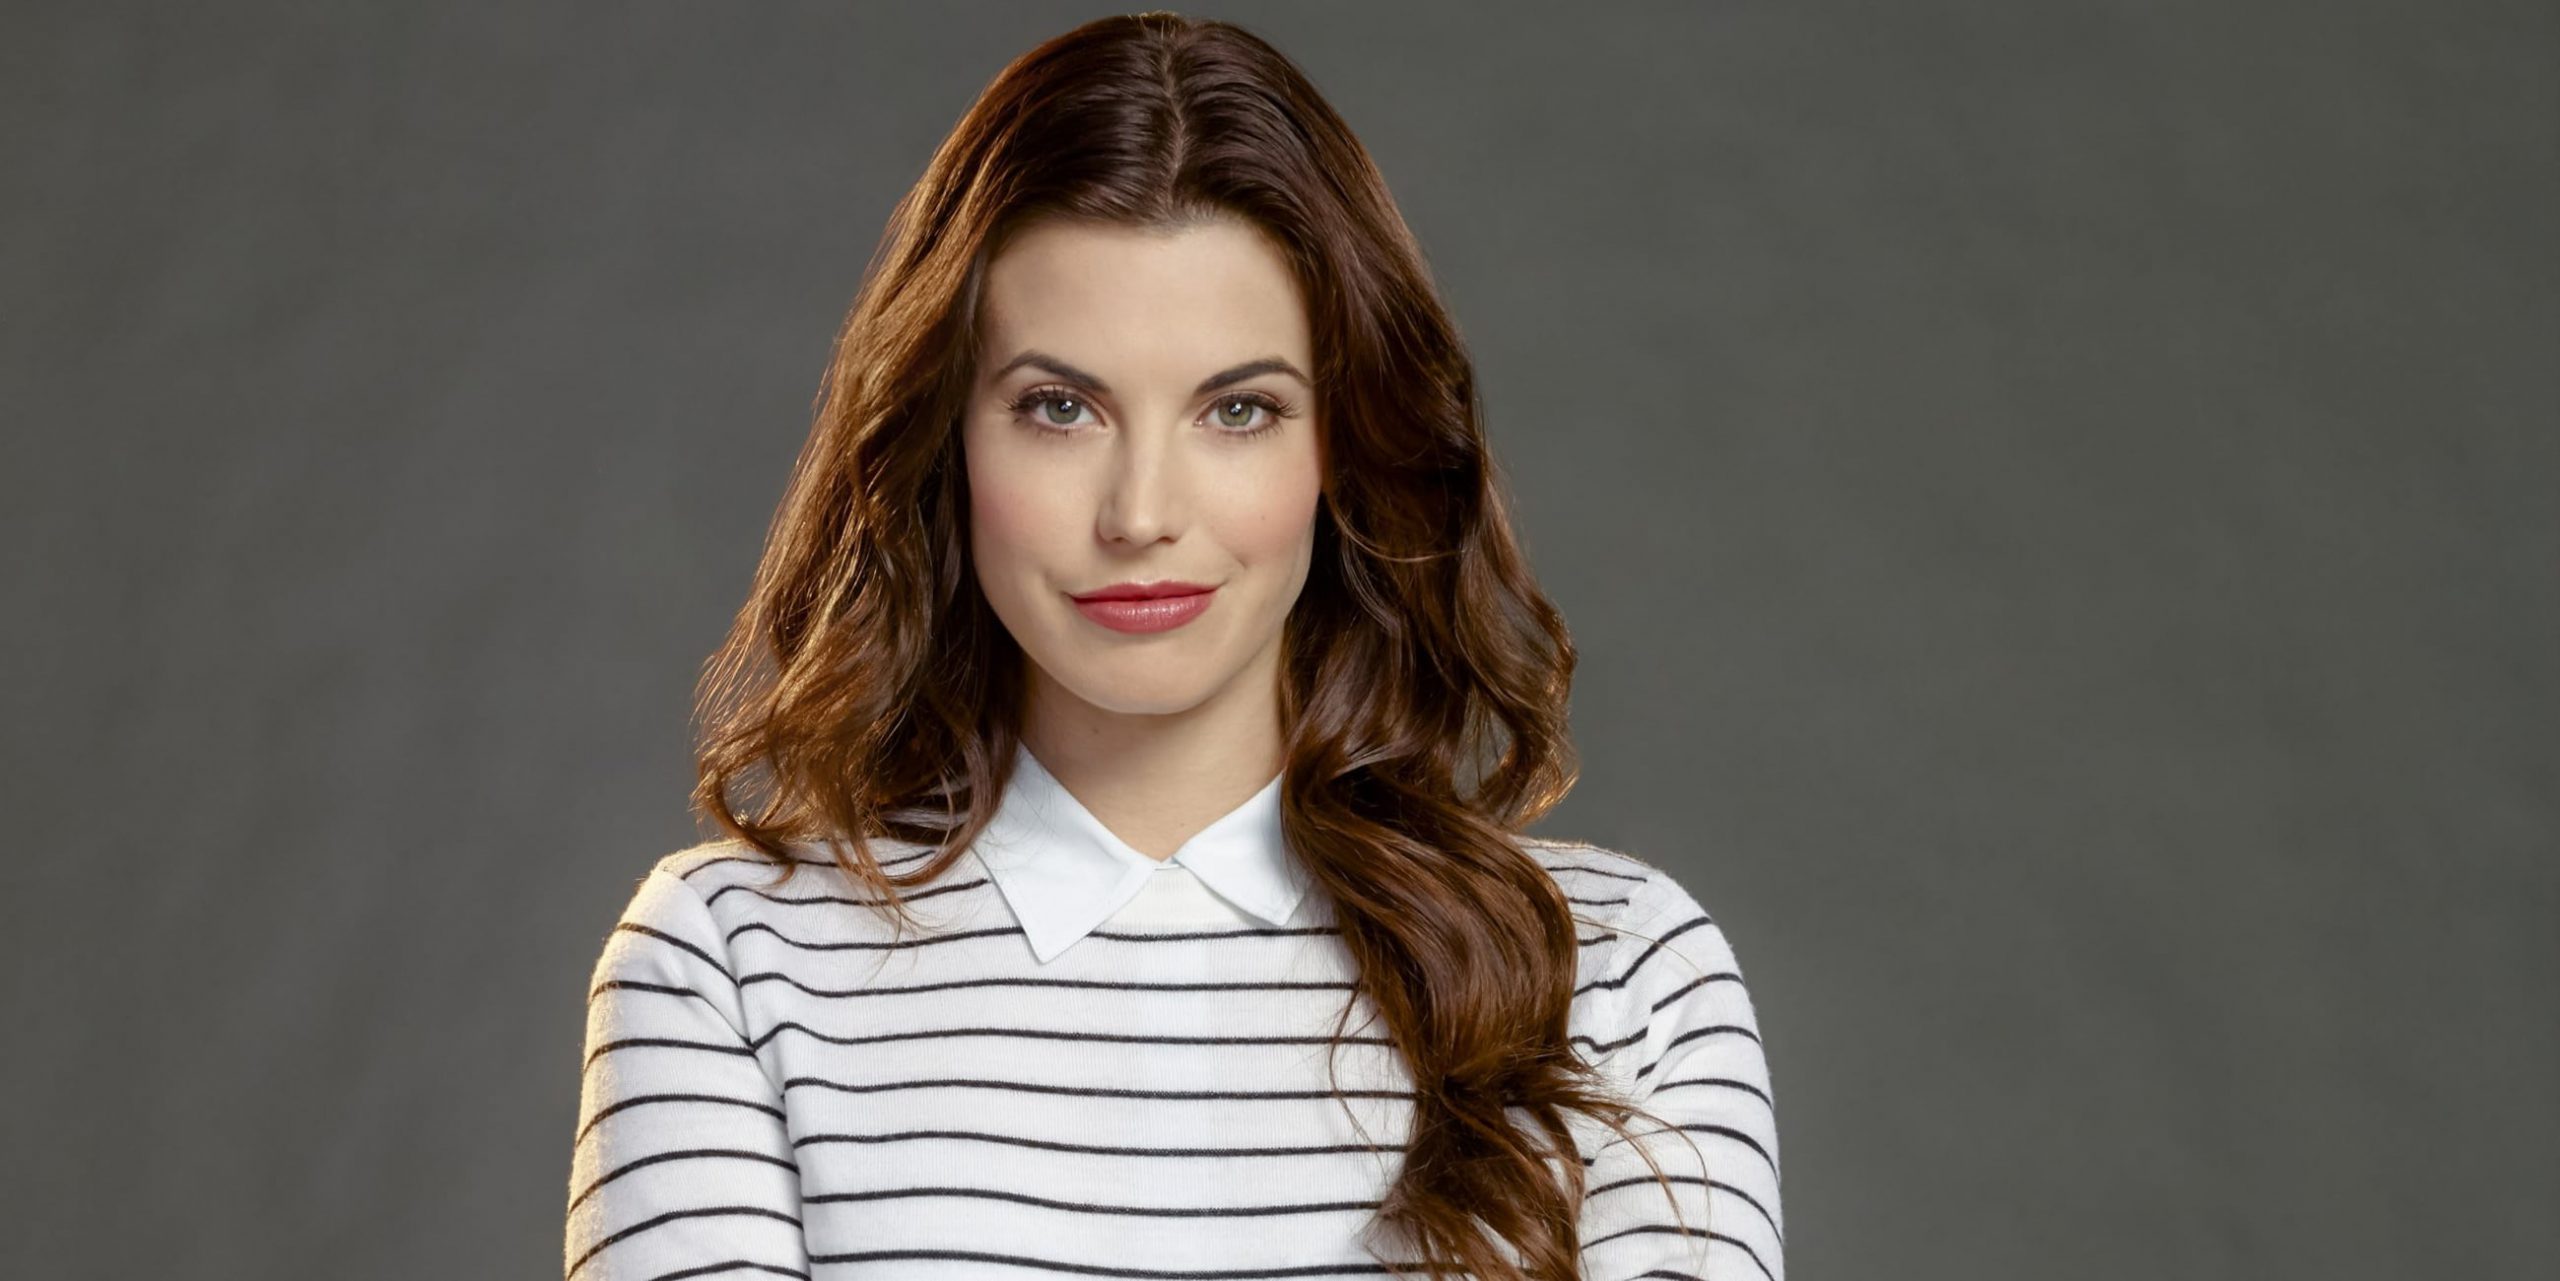 Contents1 Who is Meghan Ory?2 The Net Worth of Meghan Ory3 Early Life and A...